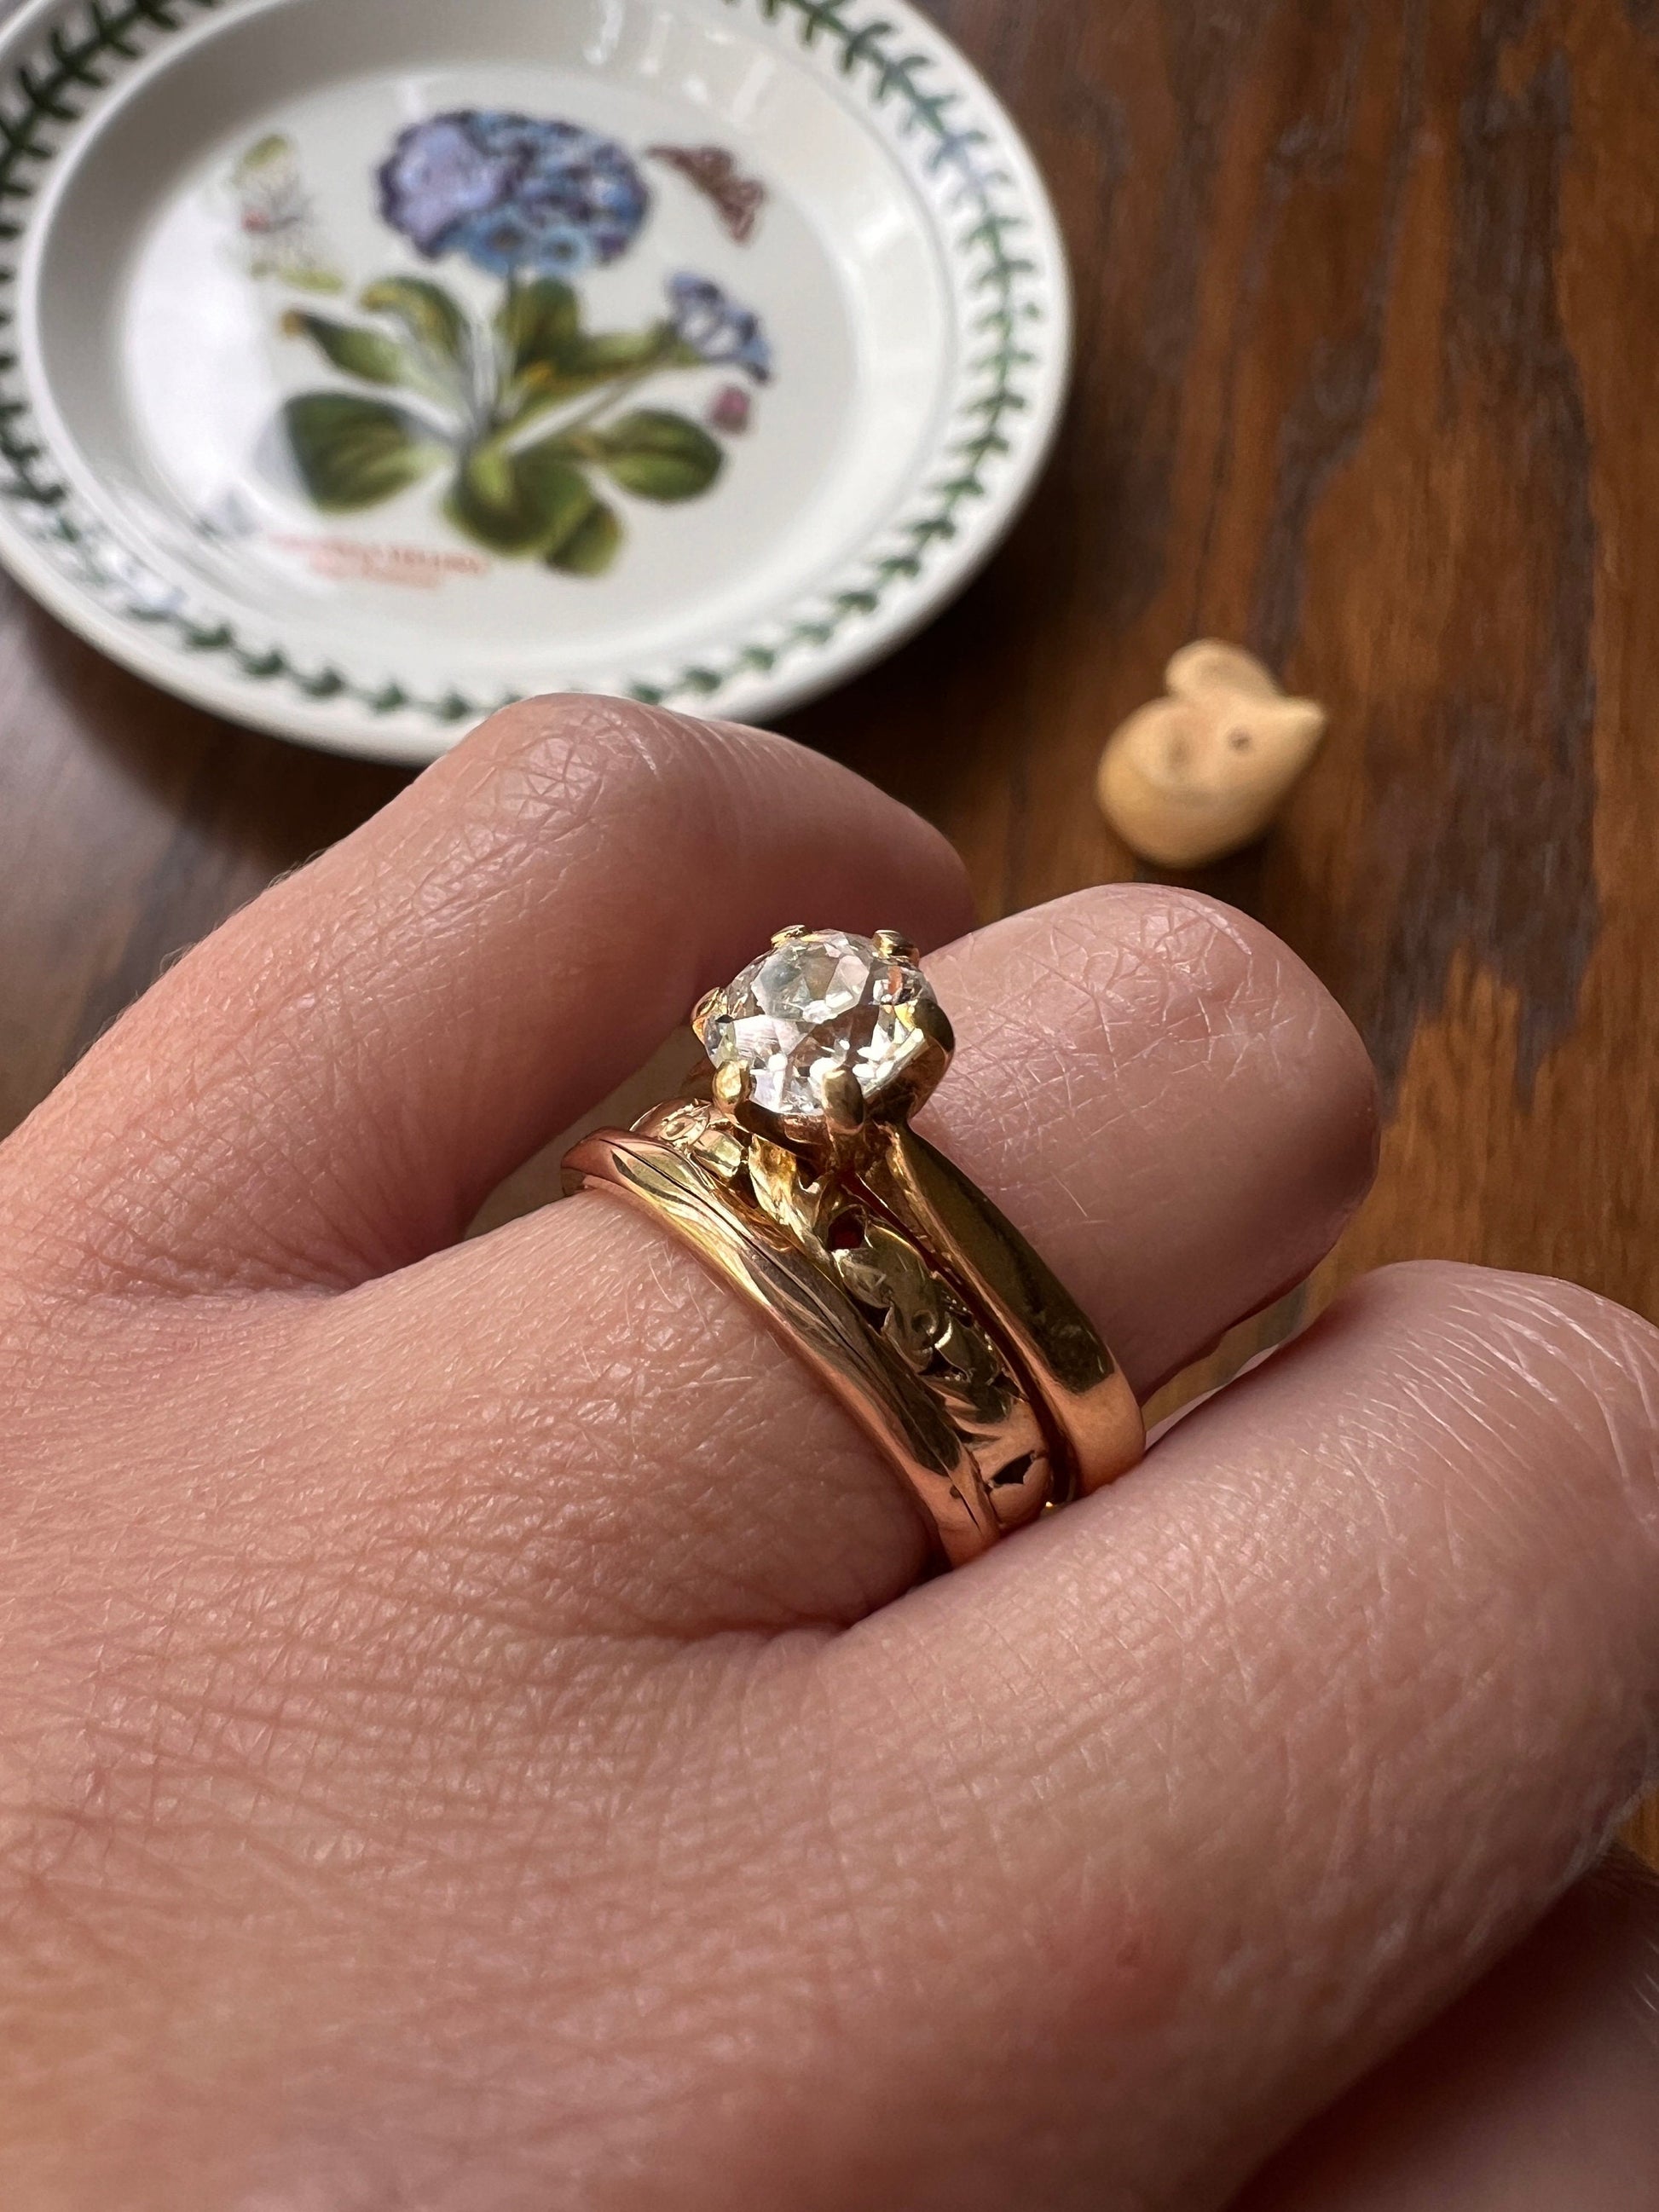 Tall Antique 0.8 Carat Old Mine Cut DIAMOND Solitaire Victorian French 18k Gold Ring Engagement Stacker Band Belle Epoque Romantic Gift OMC